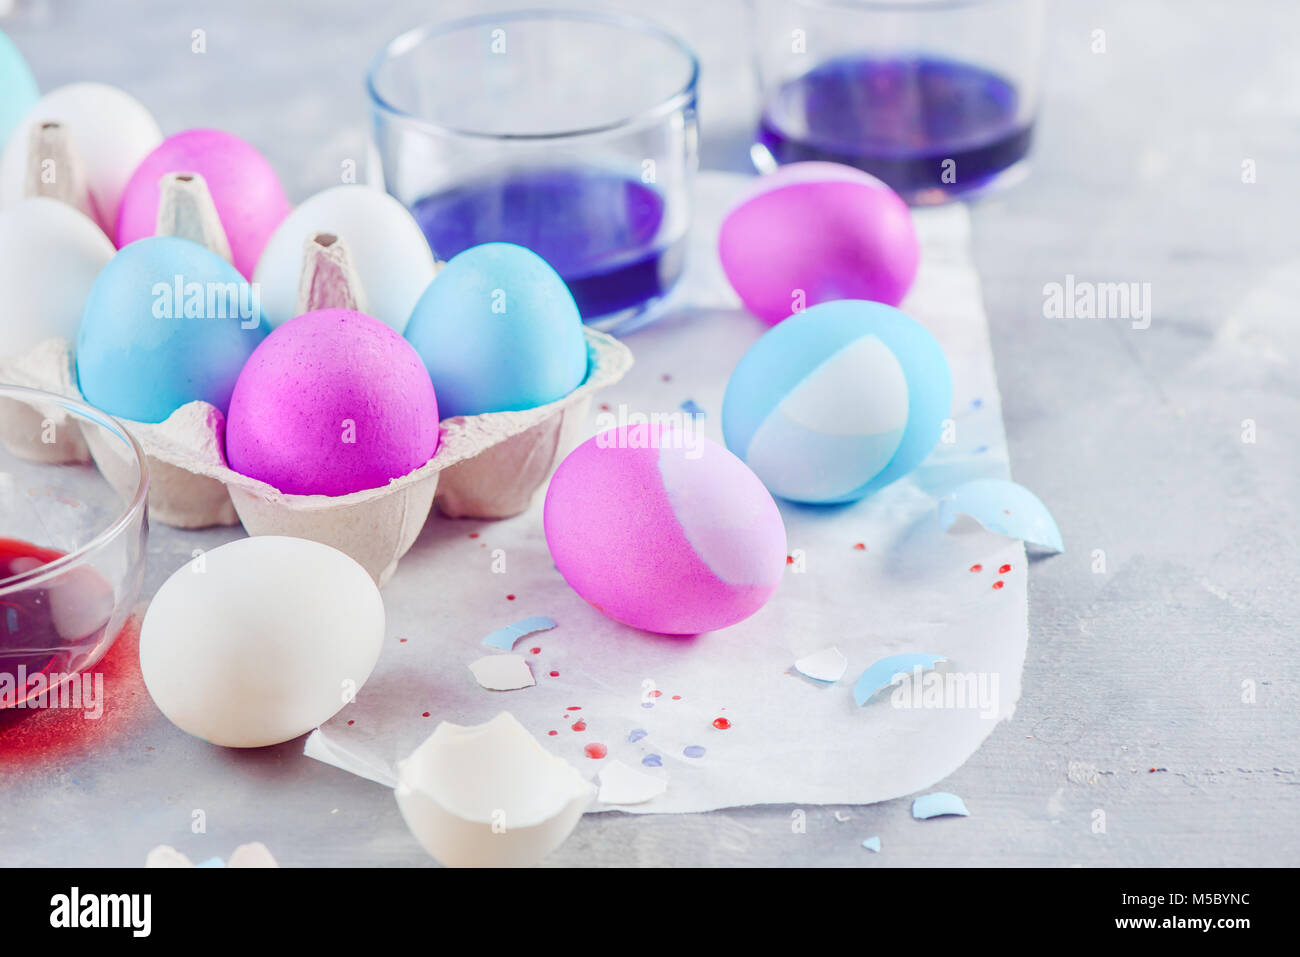 Close-up of Easter eggs painting in progress. Shades of blue, pink and purple. Holiday decorations on a white concrete background. Stock Photo